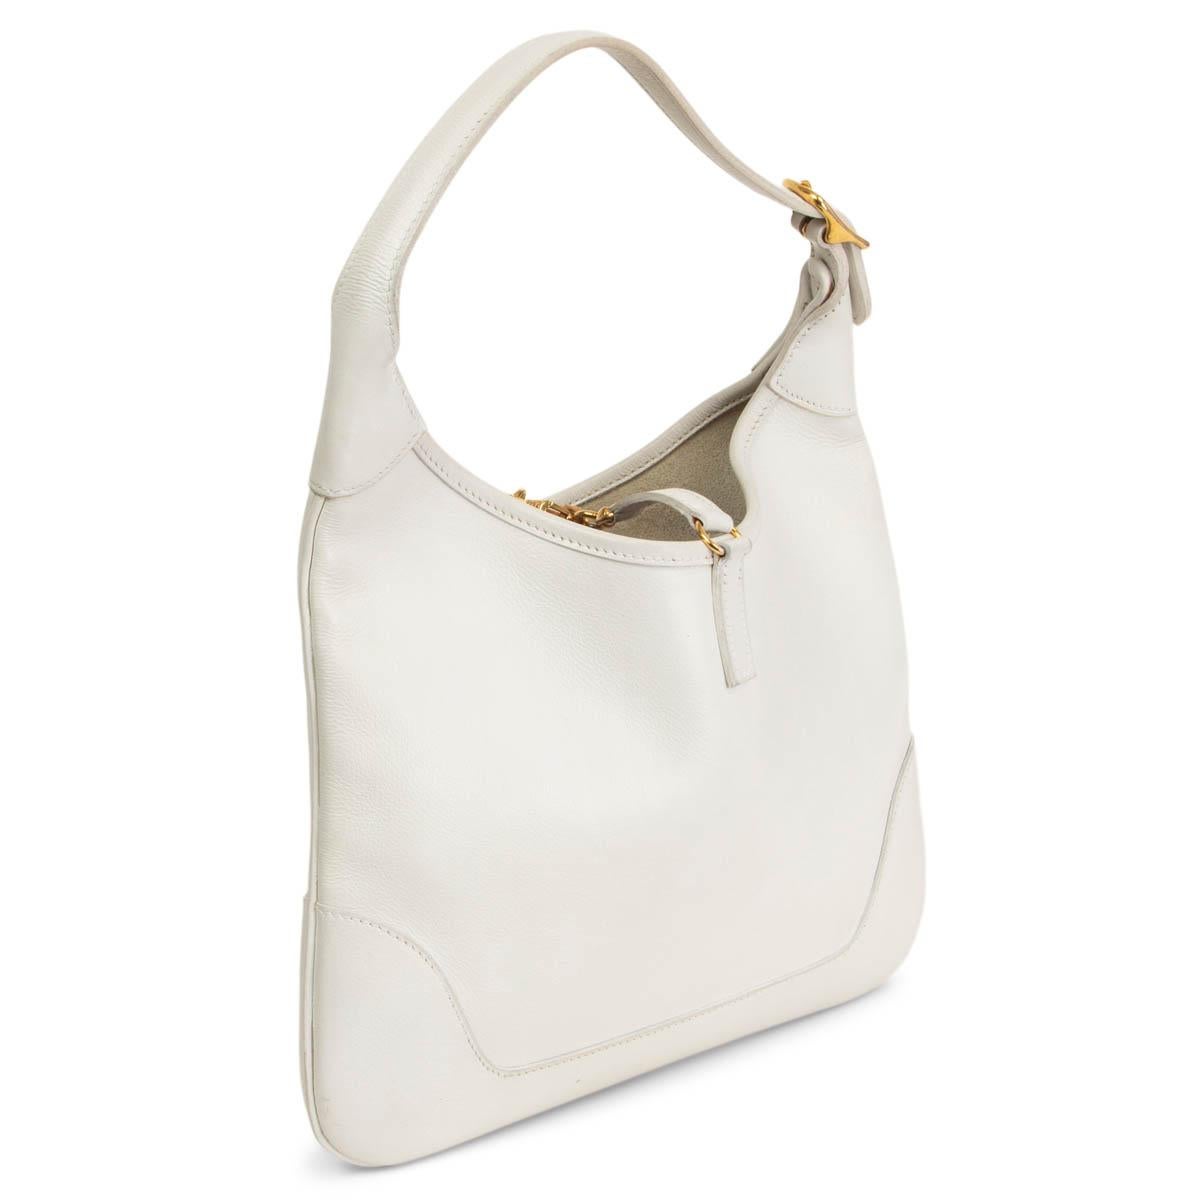 100% authentic Hermès Vintage Trim 31 shoulder bag in white Veau Gulliver featuring gold-tone hardware. Closes with a buckle on front. Unlined. Has been carried with some faint wear to the edges. Overall in very good Vintage condition. Comes with